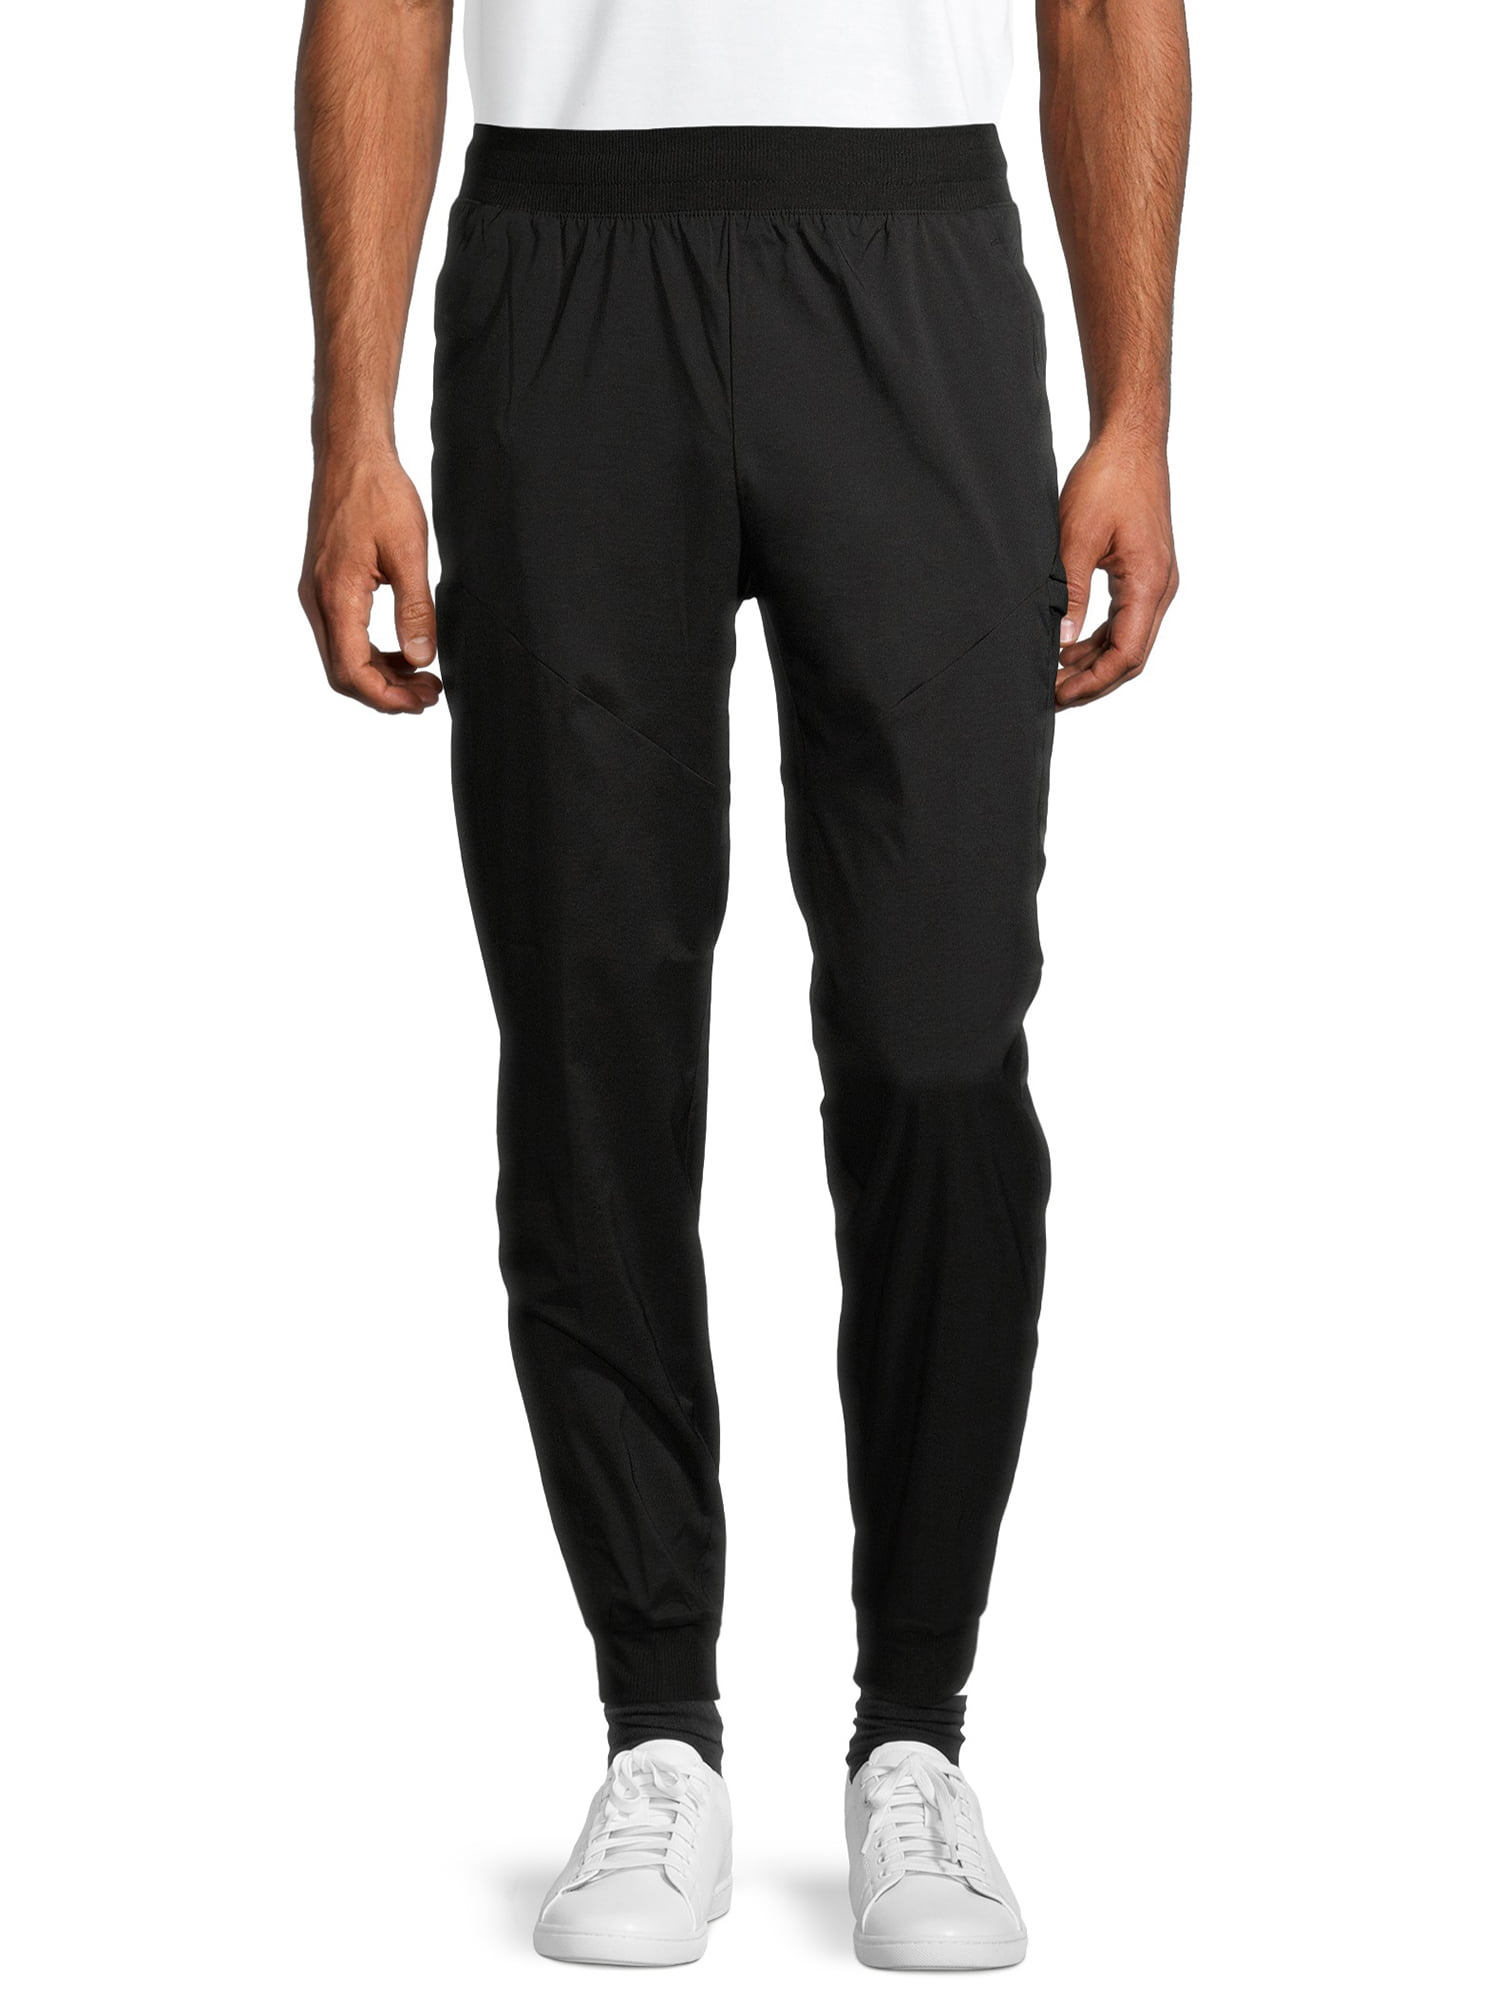 Apana Men's Woven Stretch Cargo Athletic Pants 